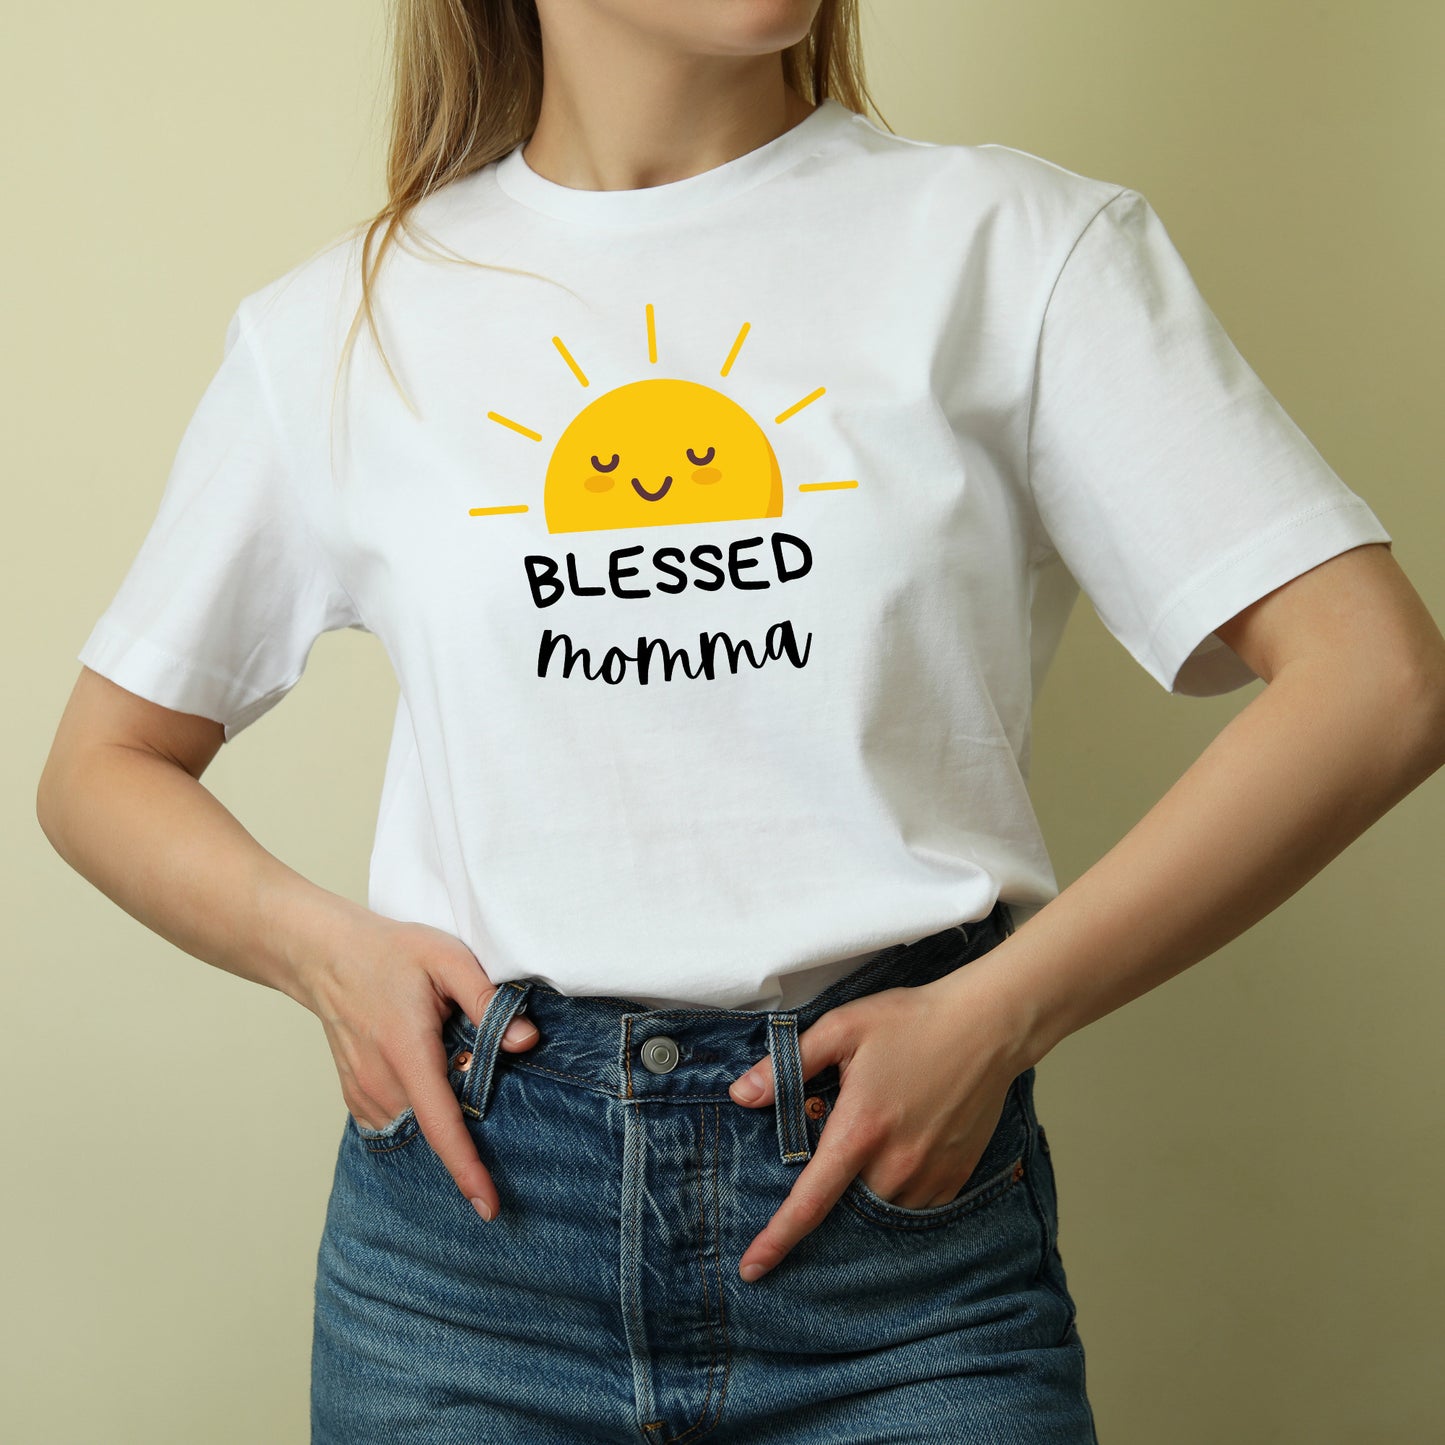 blessed sunshine momma, bible verse to encourage mothers, blessed momma home momma shirt